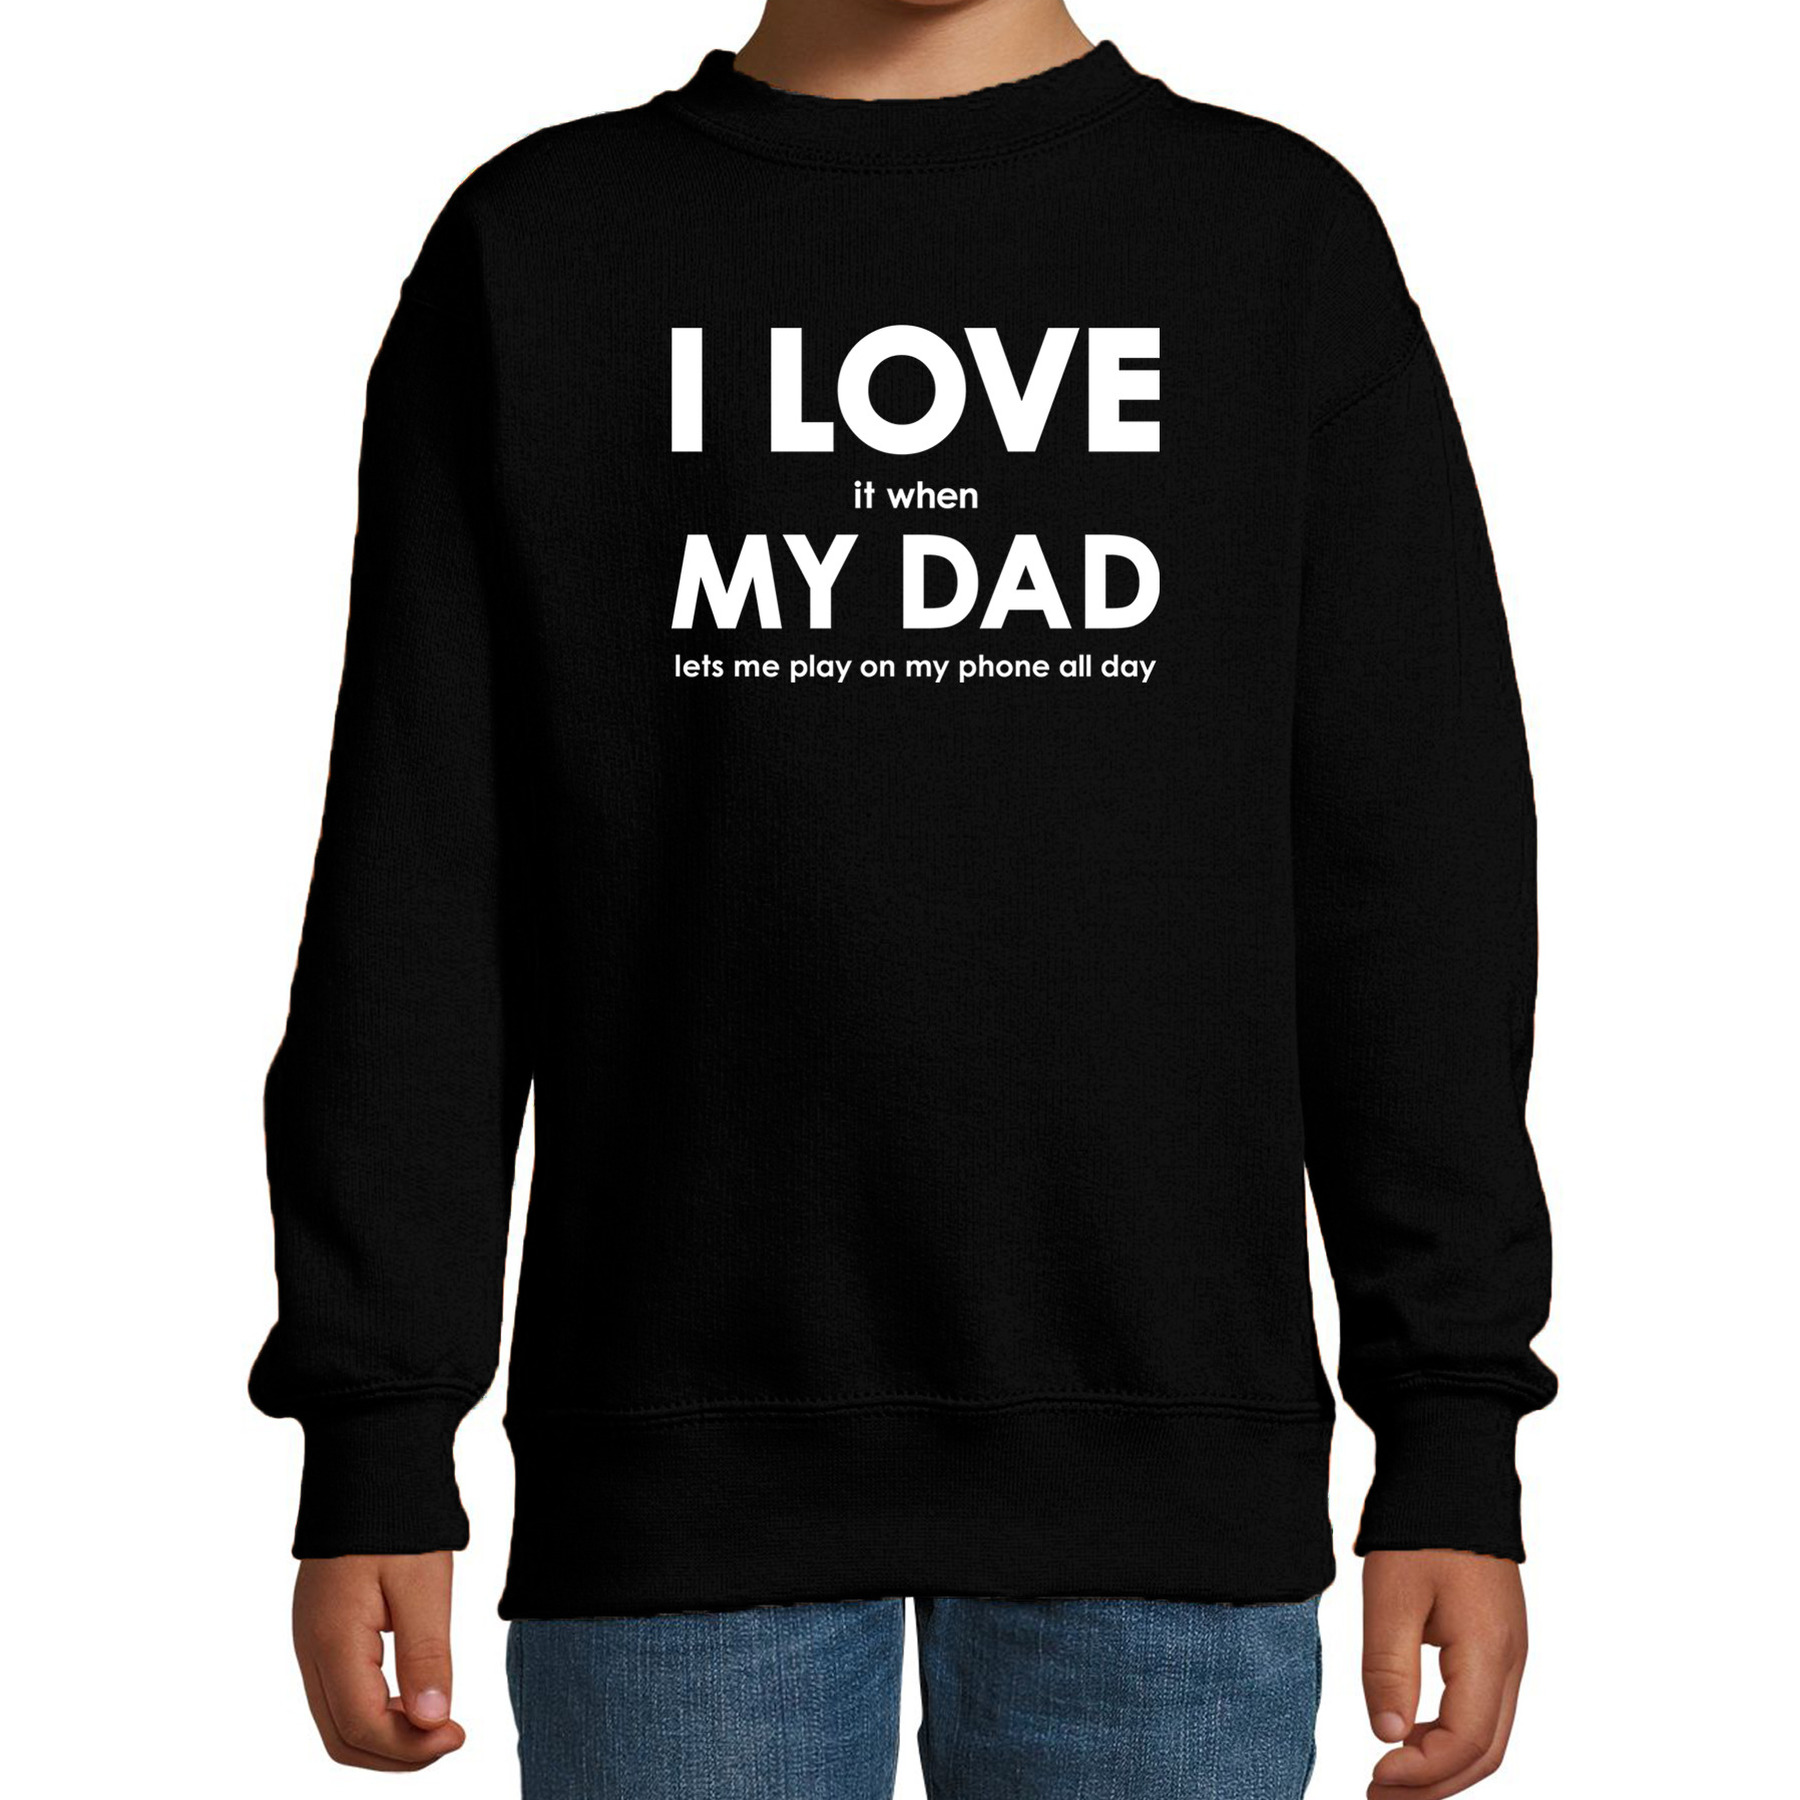 I love it when my dad lets me play on my phone all day sweater zwart voor kids